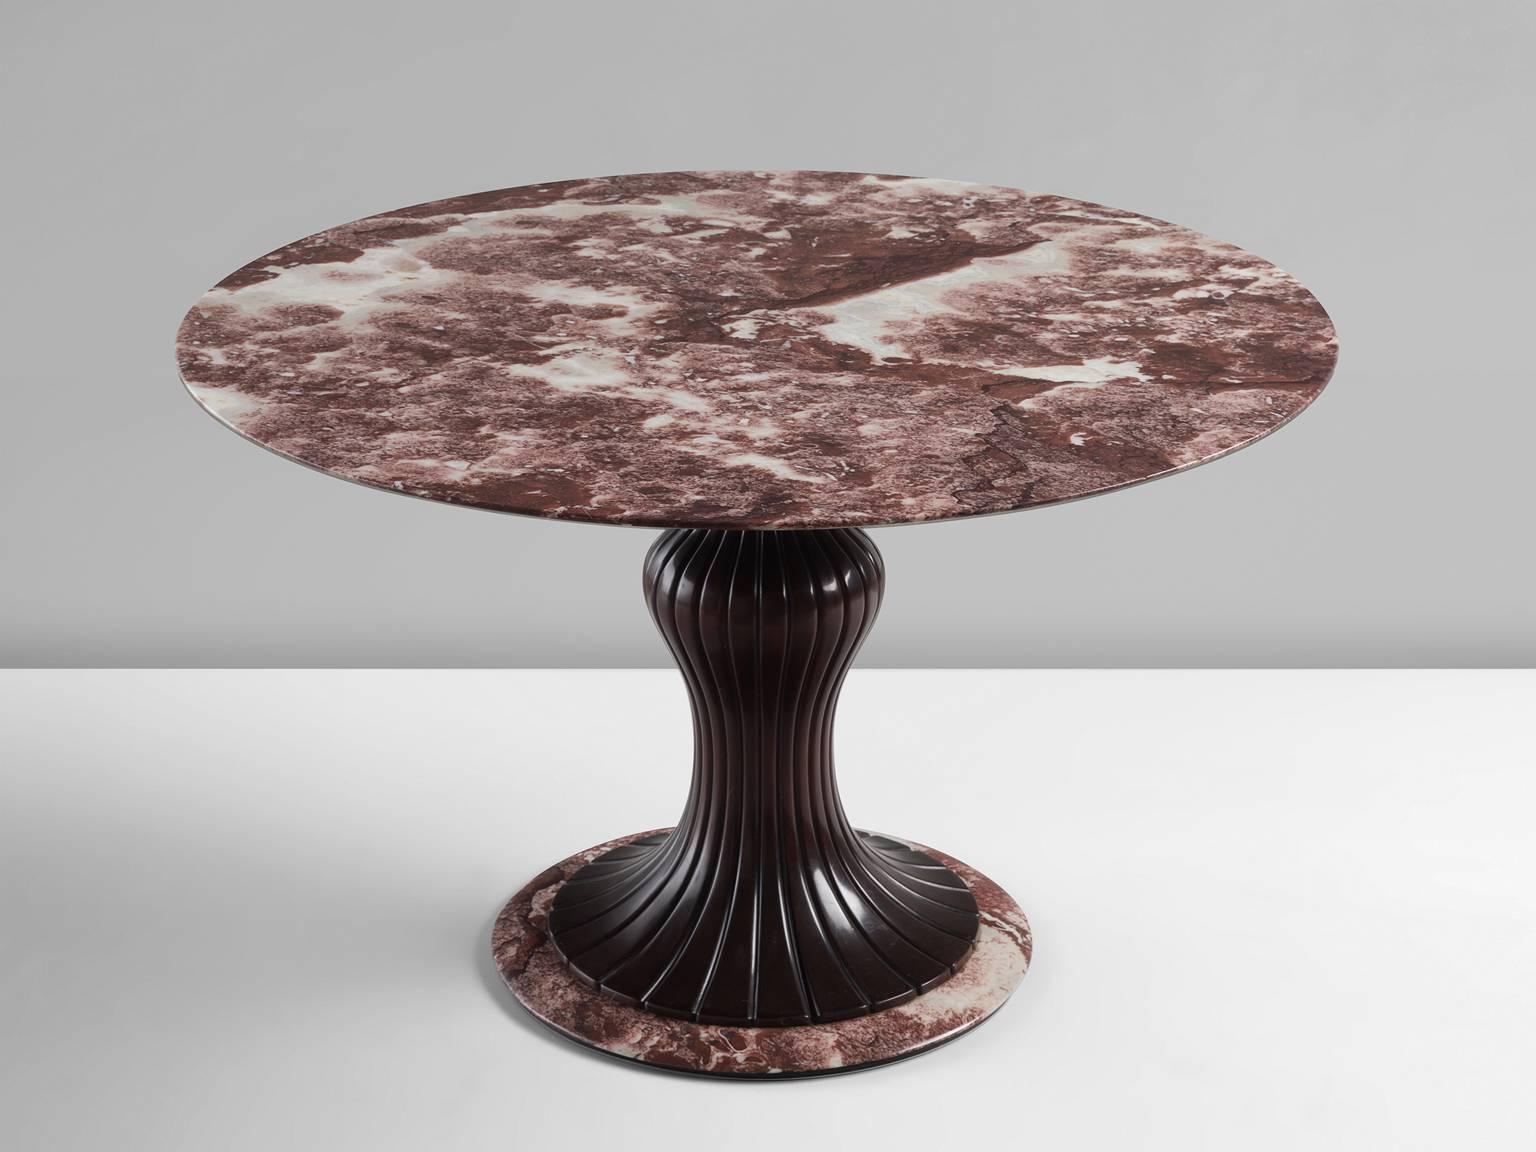 Dining table, in marble and wood by Osvaldo Borsani, Italy, 1950s. 

This distinctive center table is made in the 1950s and holds a wooden decorated shaft. The main feature of this table is the deep purple to red marble thin marble top. The veins